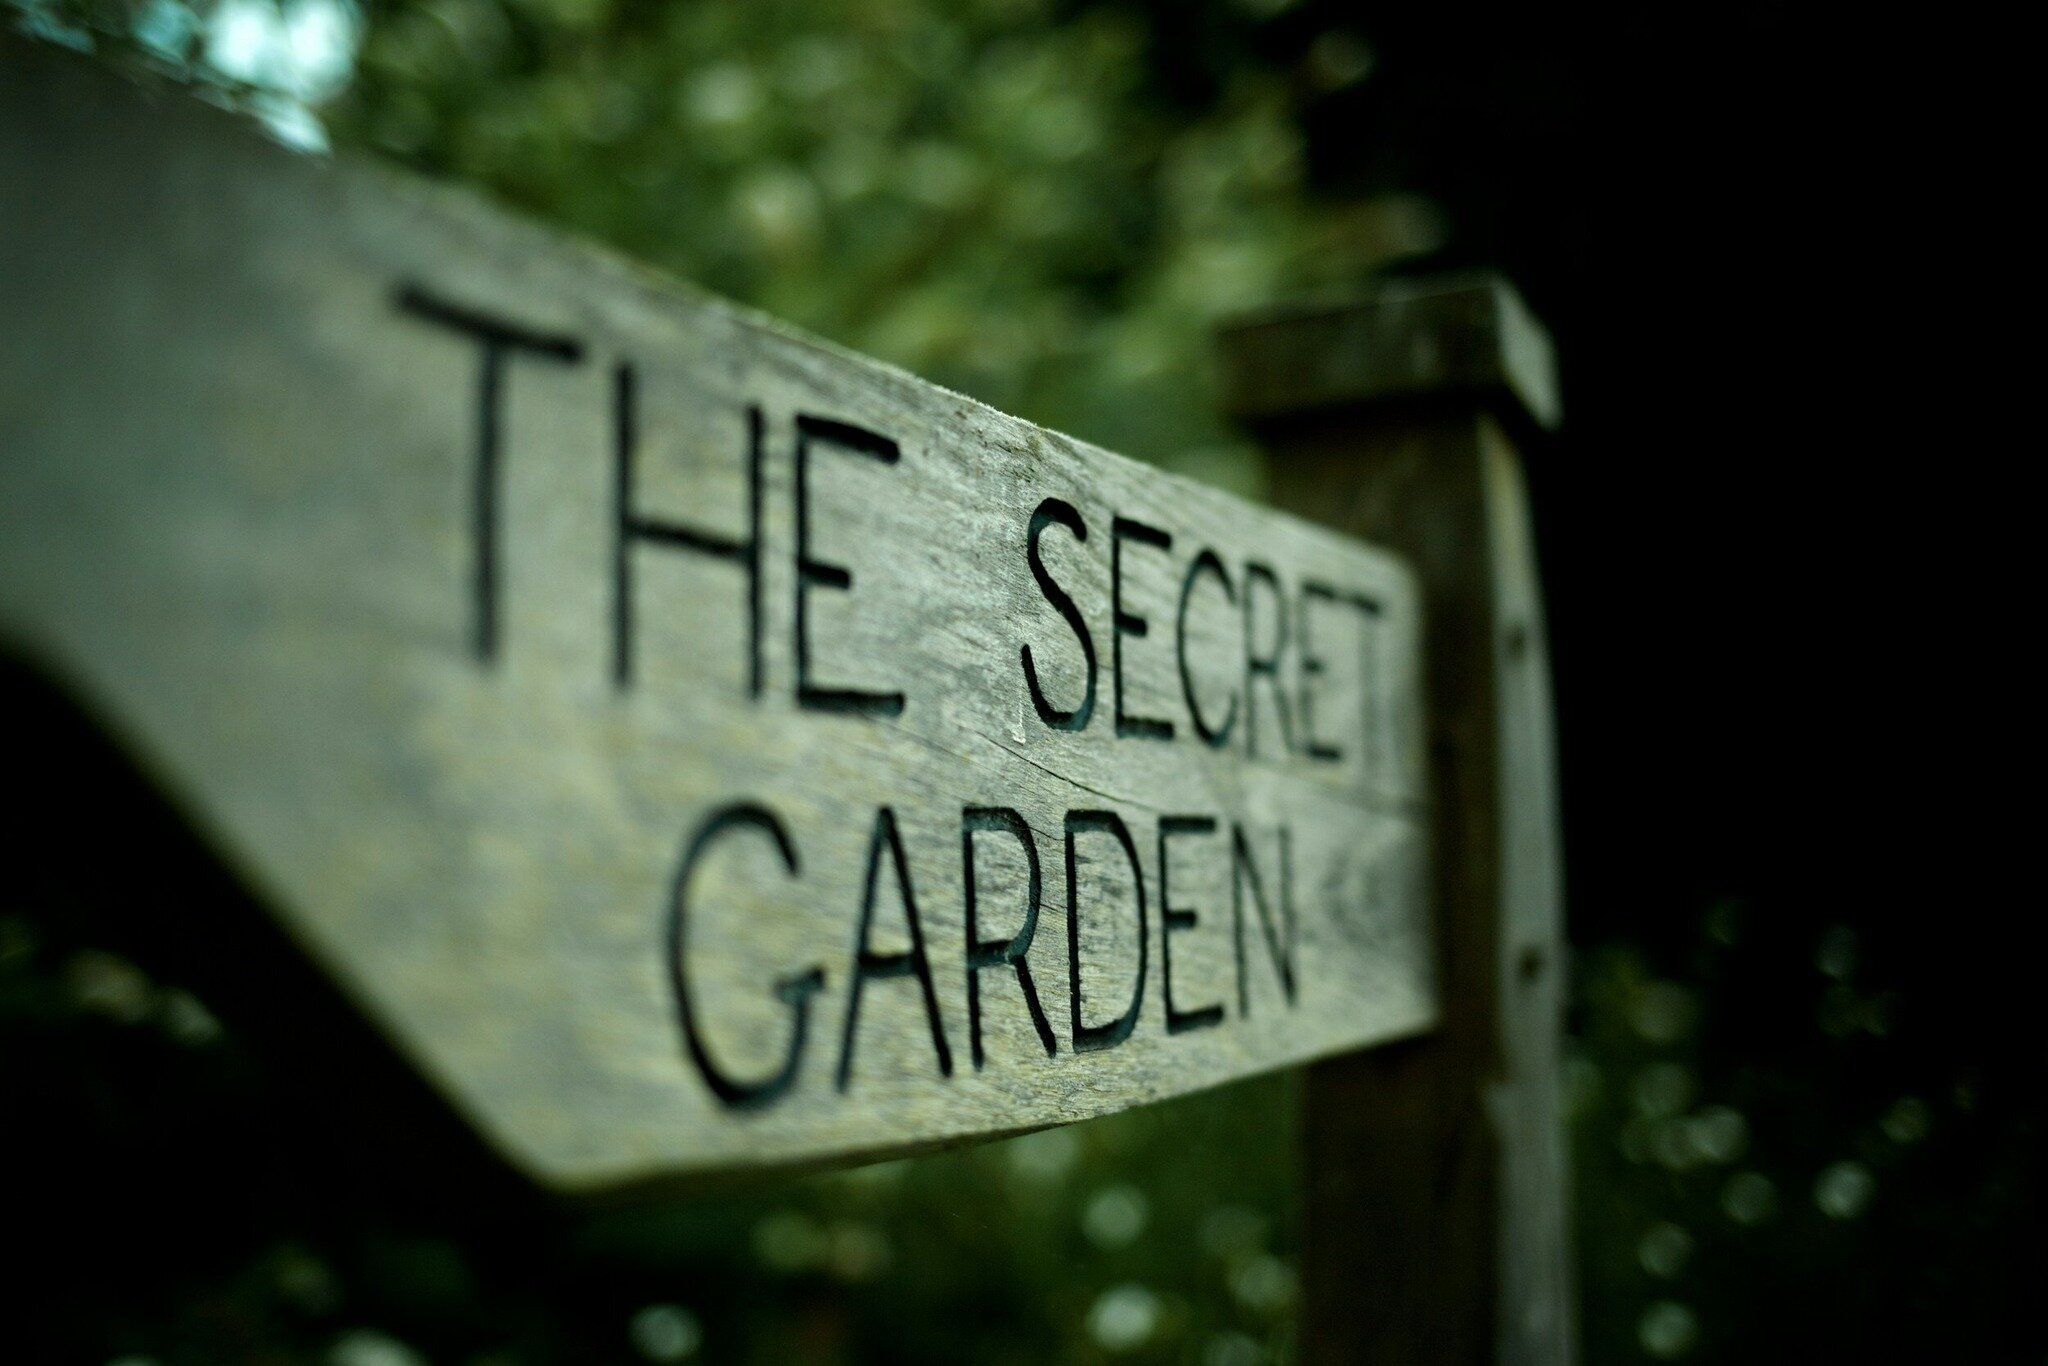 Why aren't you stepping into your very own Secret Garden?
This new story is about a woman who knows things have to change - in moments of reflection she sees herself standing outside The Secret Garden, unable to move as if her feet were glued to the 